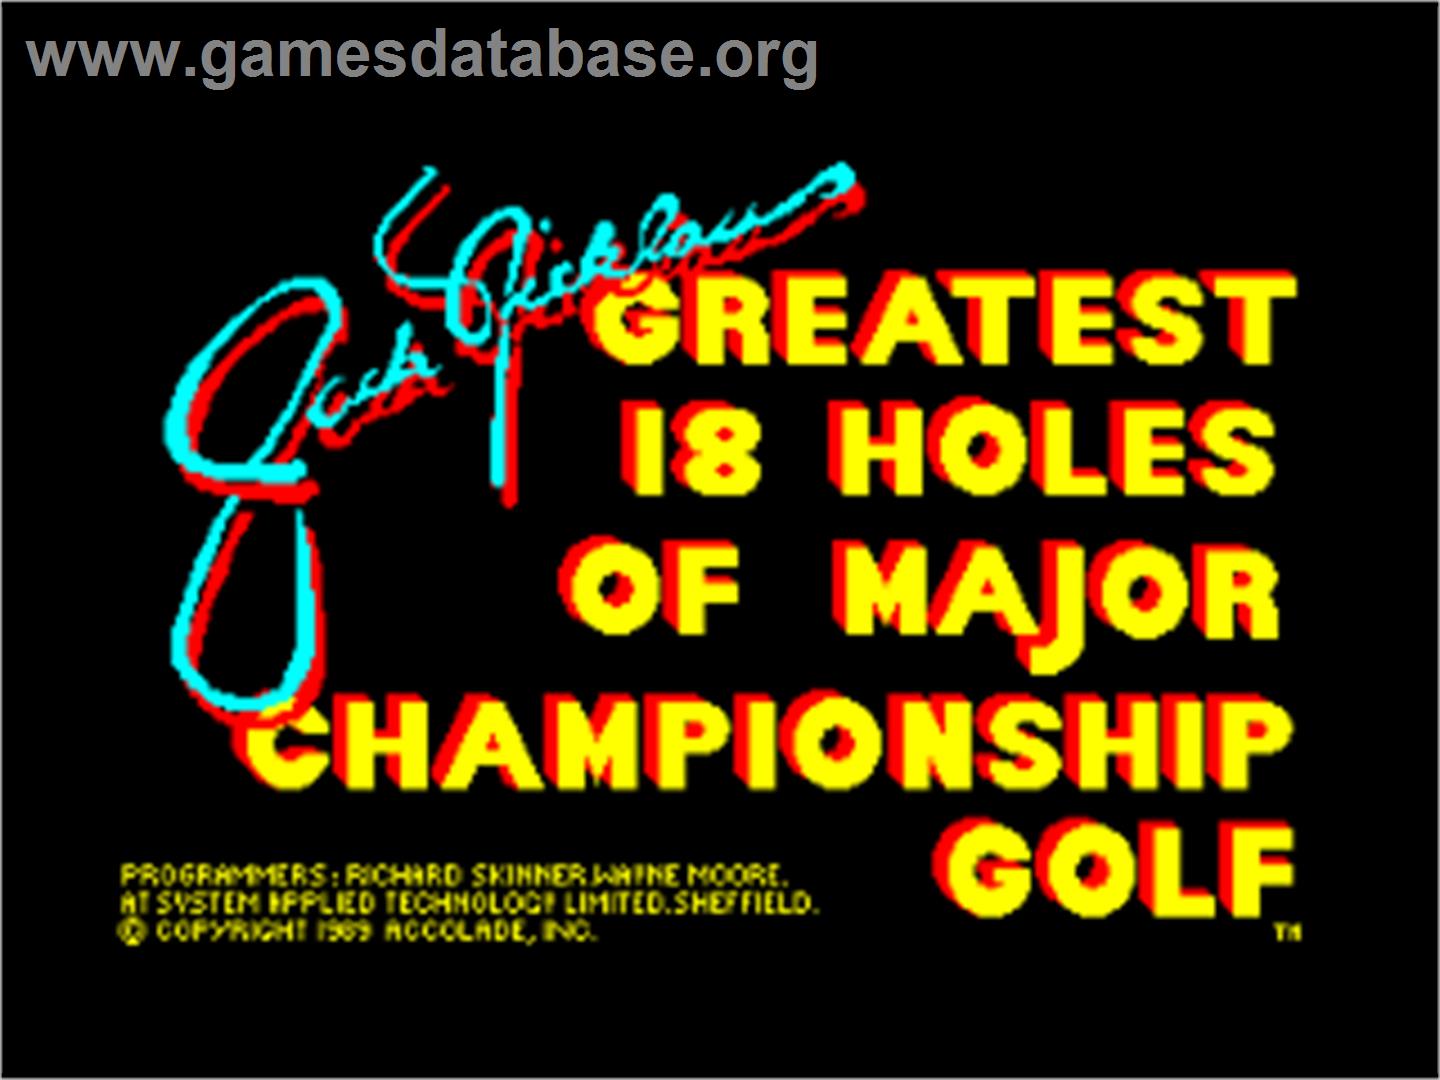 Jack Nicklaus' Greatest 18 Holes of Major Championship Golf - Amstrad CPC - Artwork - Title Screen